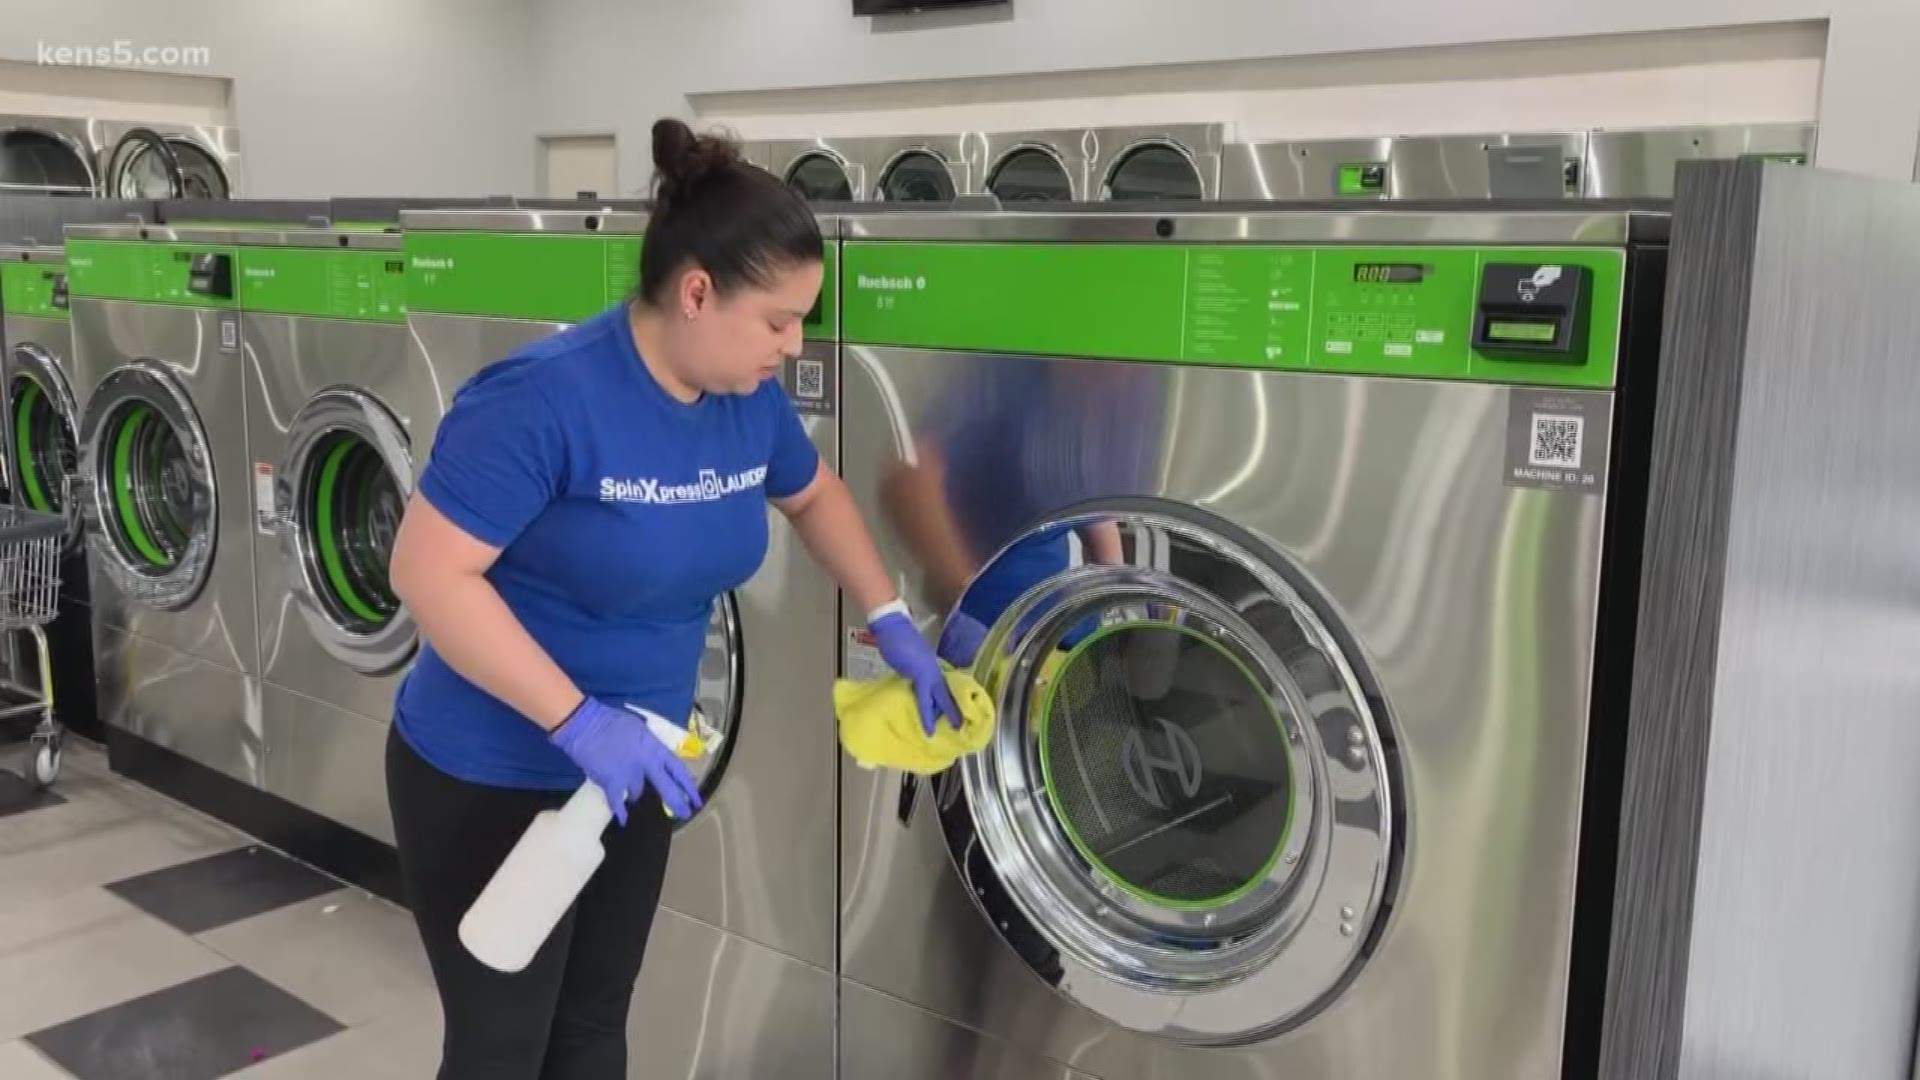 Coronavirus can survive on surfaces. Here's what Goodwill and a local laundromat are doing to reduce the risk of community spread.